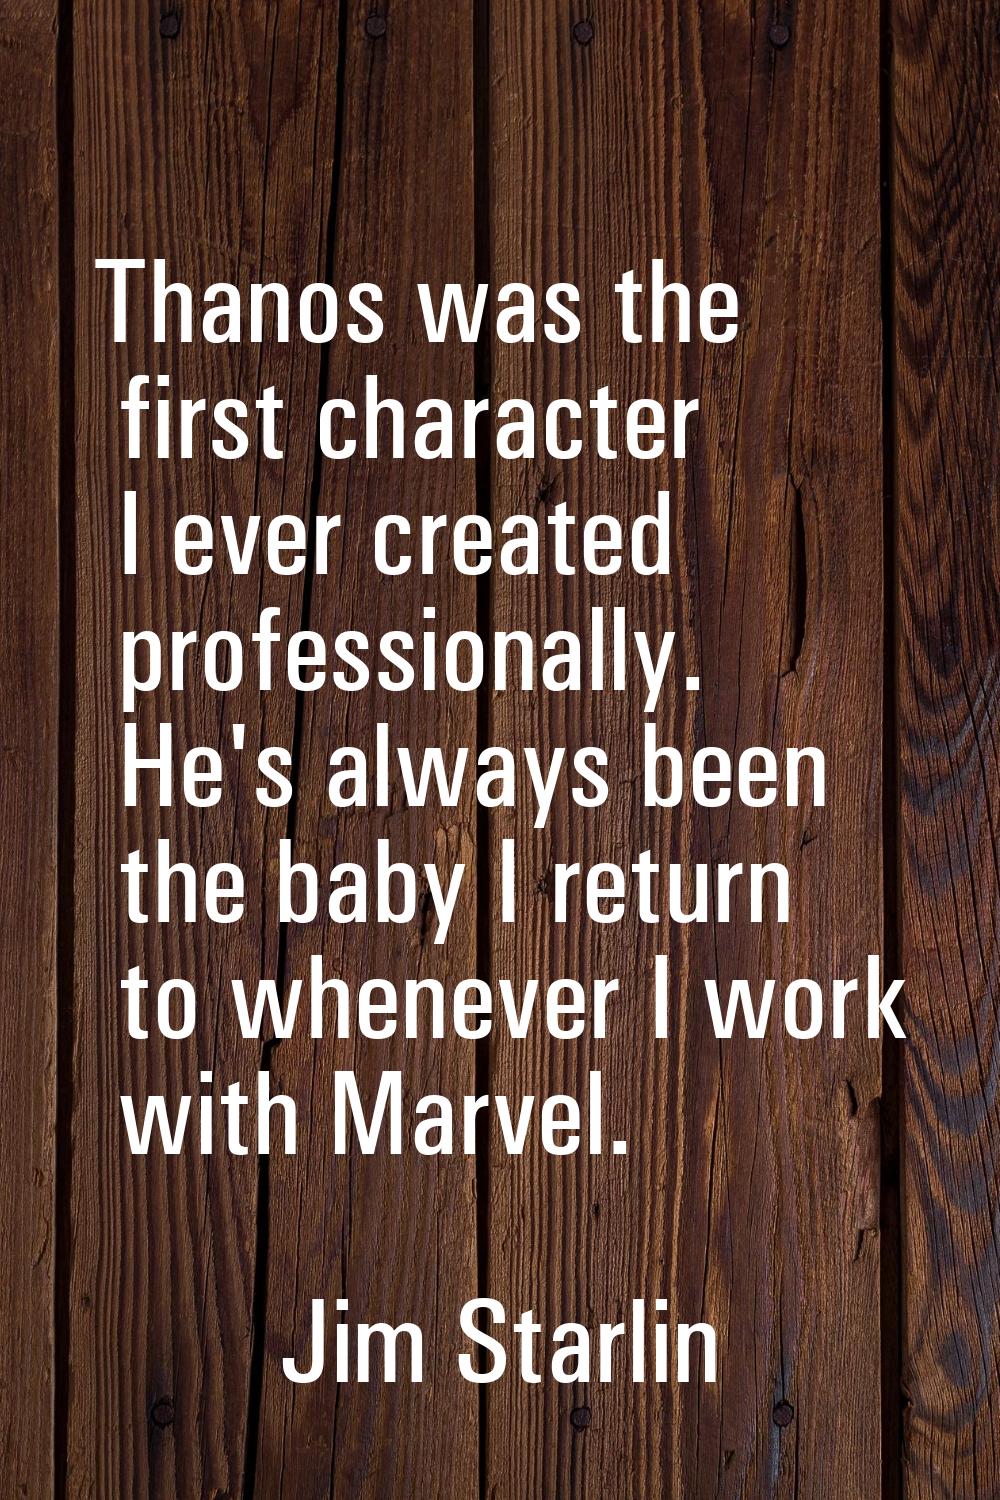 Thanos was the first character I ever created professionally. He's always been the baby I return to